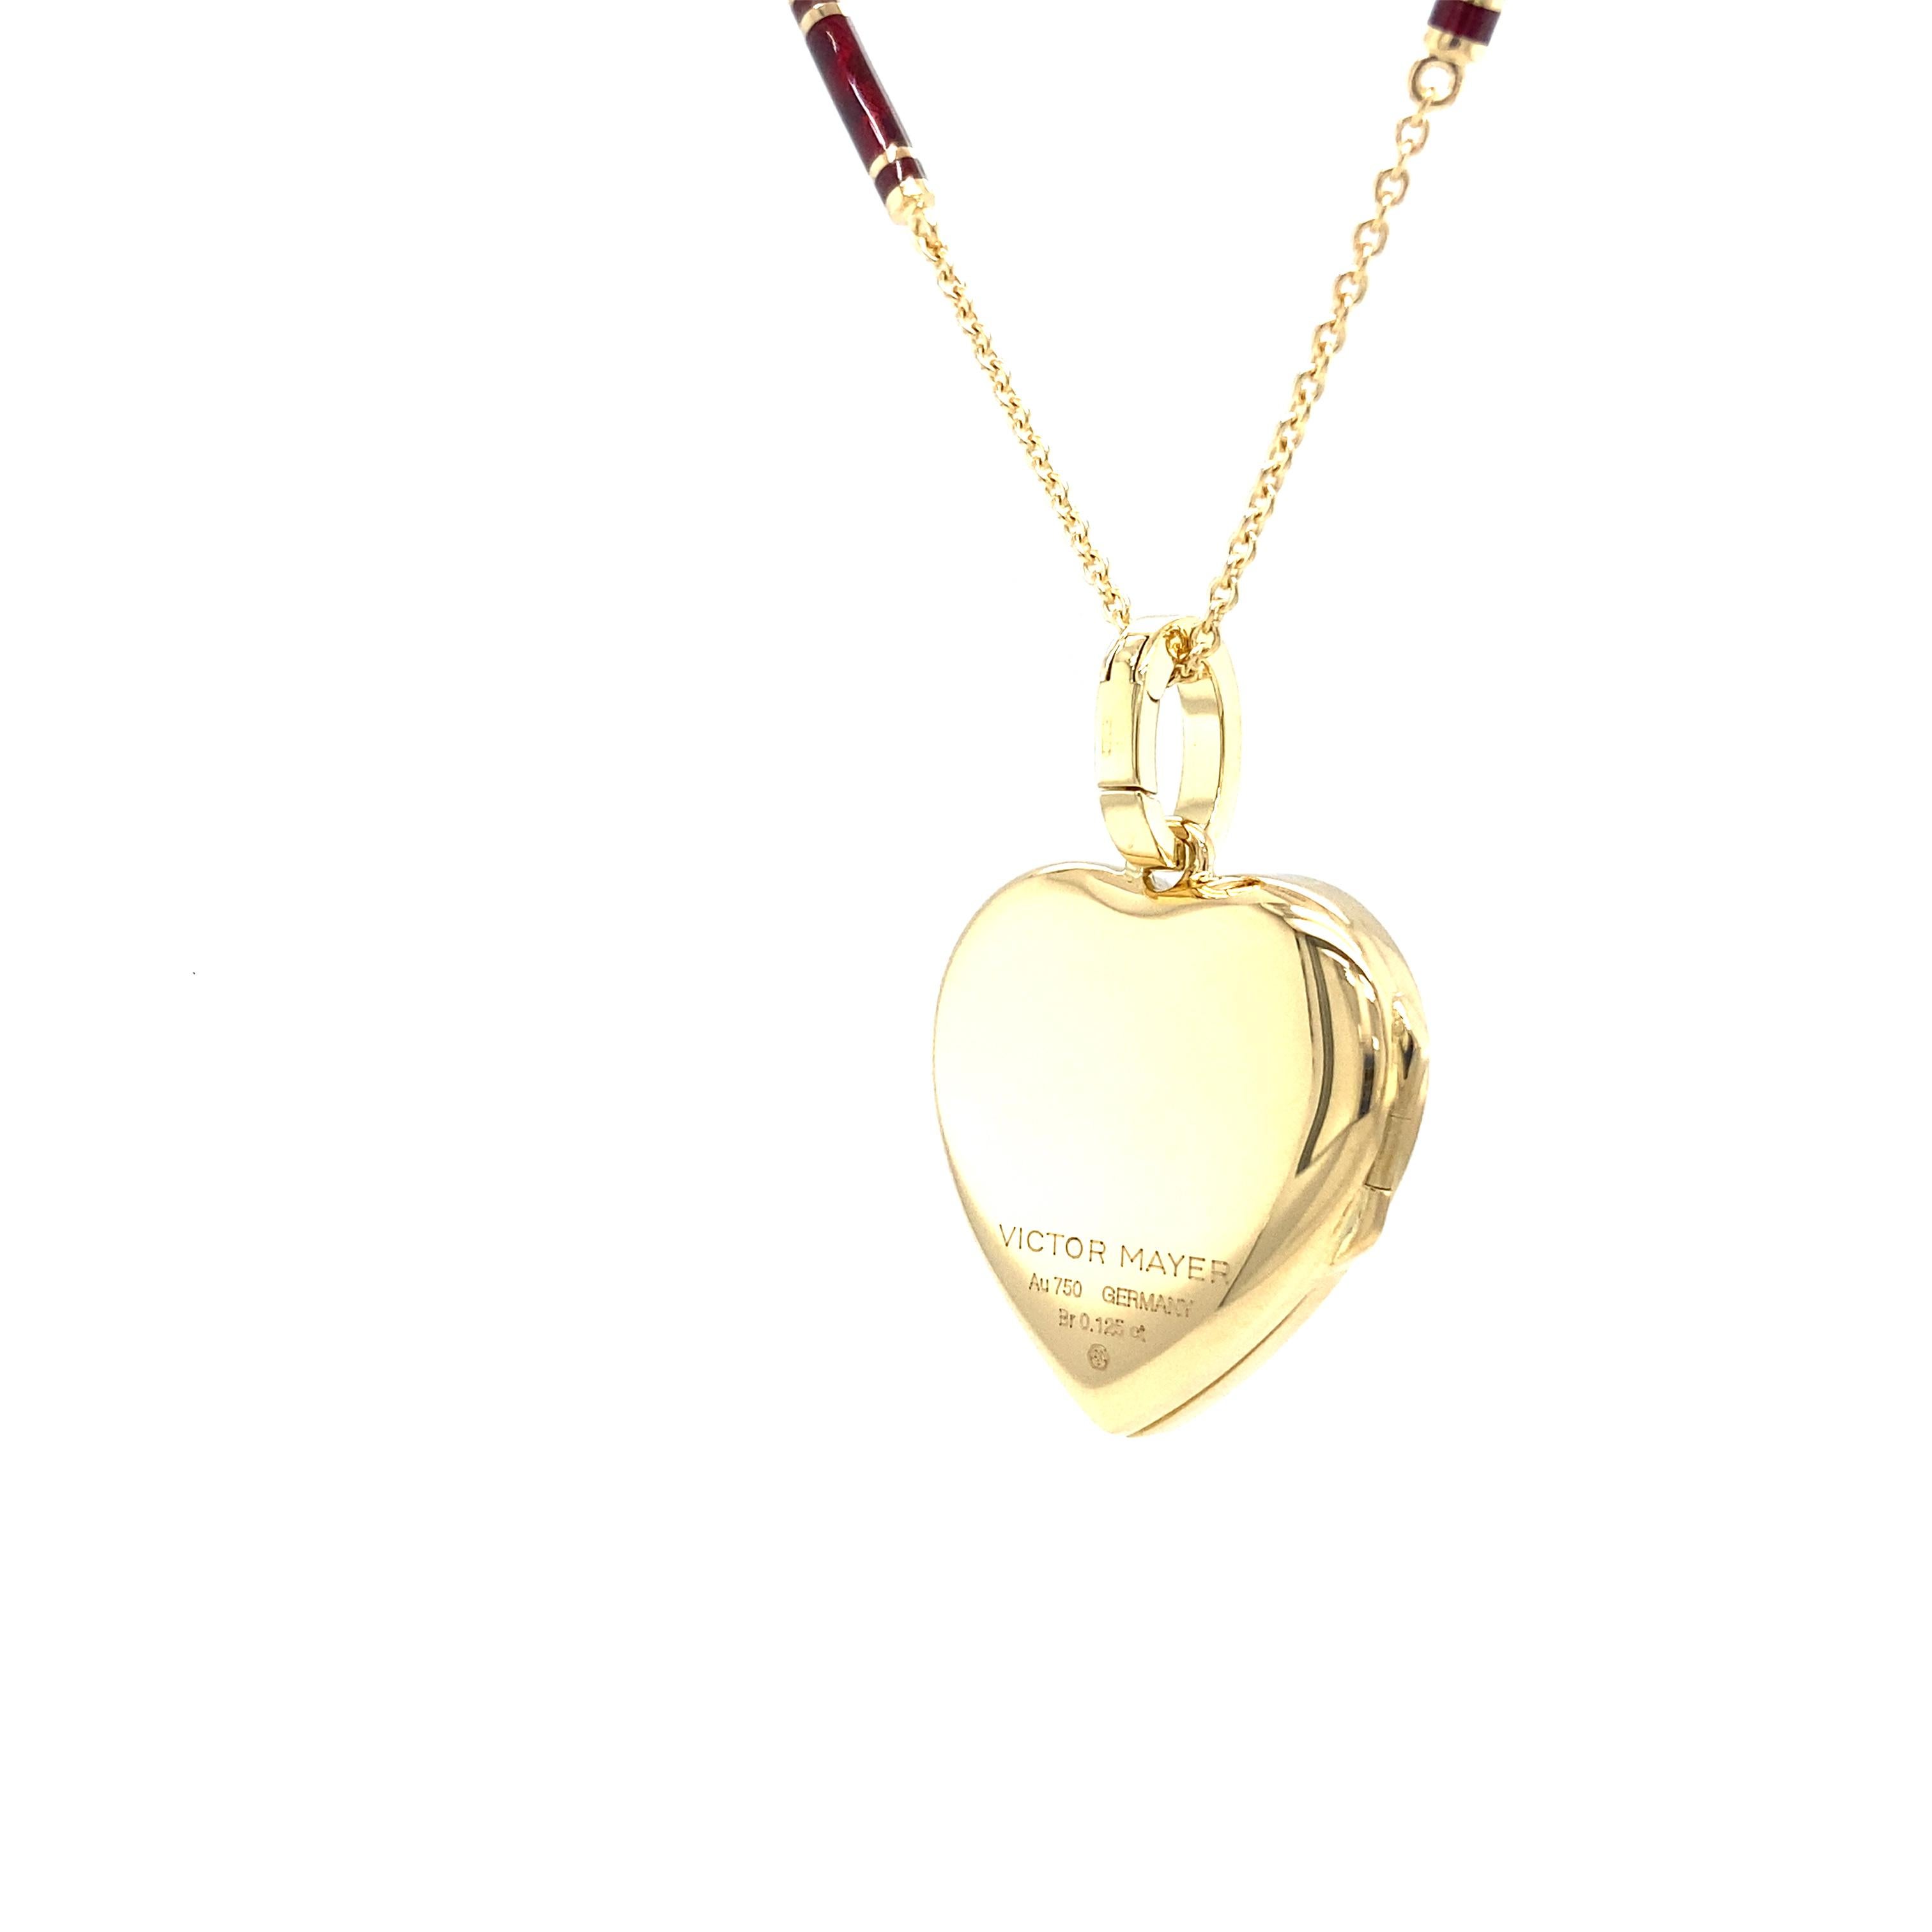 Victor Mayer heart shaped locket pendant necklace, enamel link chain, 18k yellow gold, pink and burgundy red vitreous enamel, 6 diamonds, total 0.12 ct, H VS

About the creator Victor Mayer 
Victor Mayer is internationally renowned for elegant